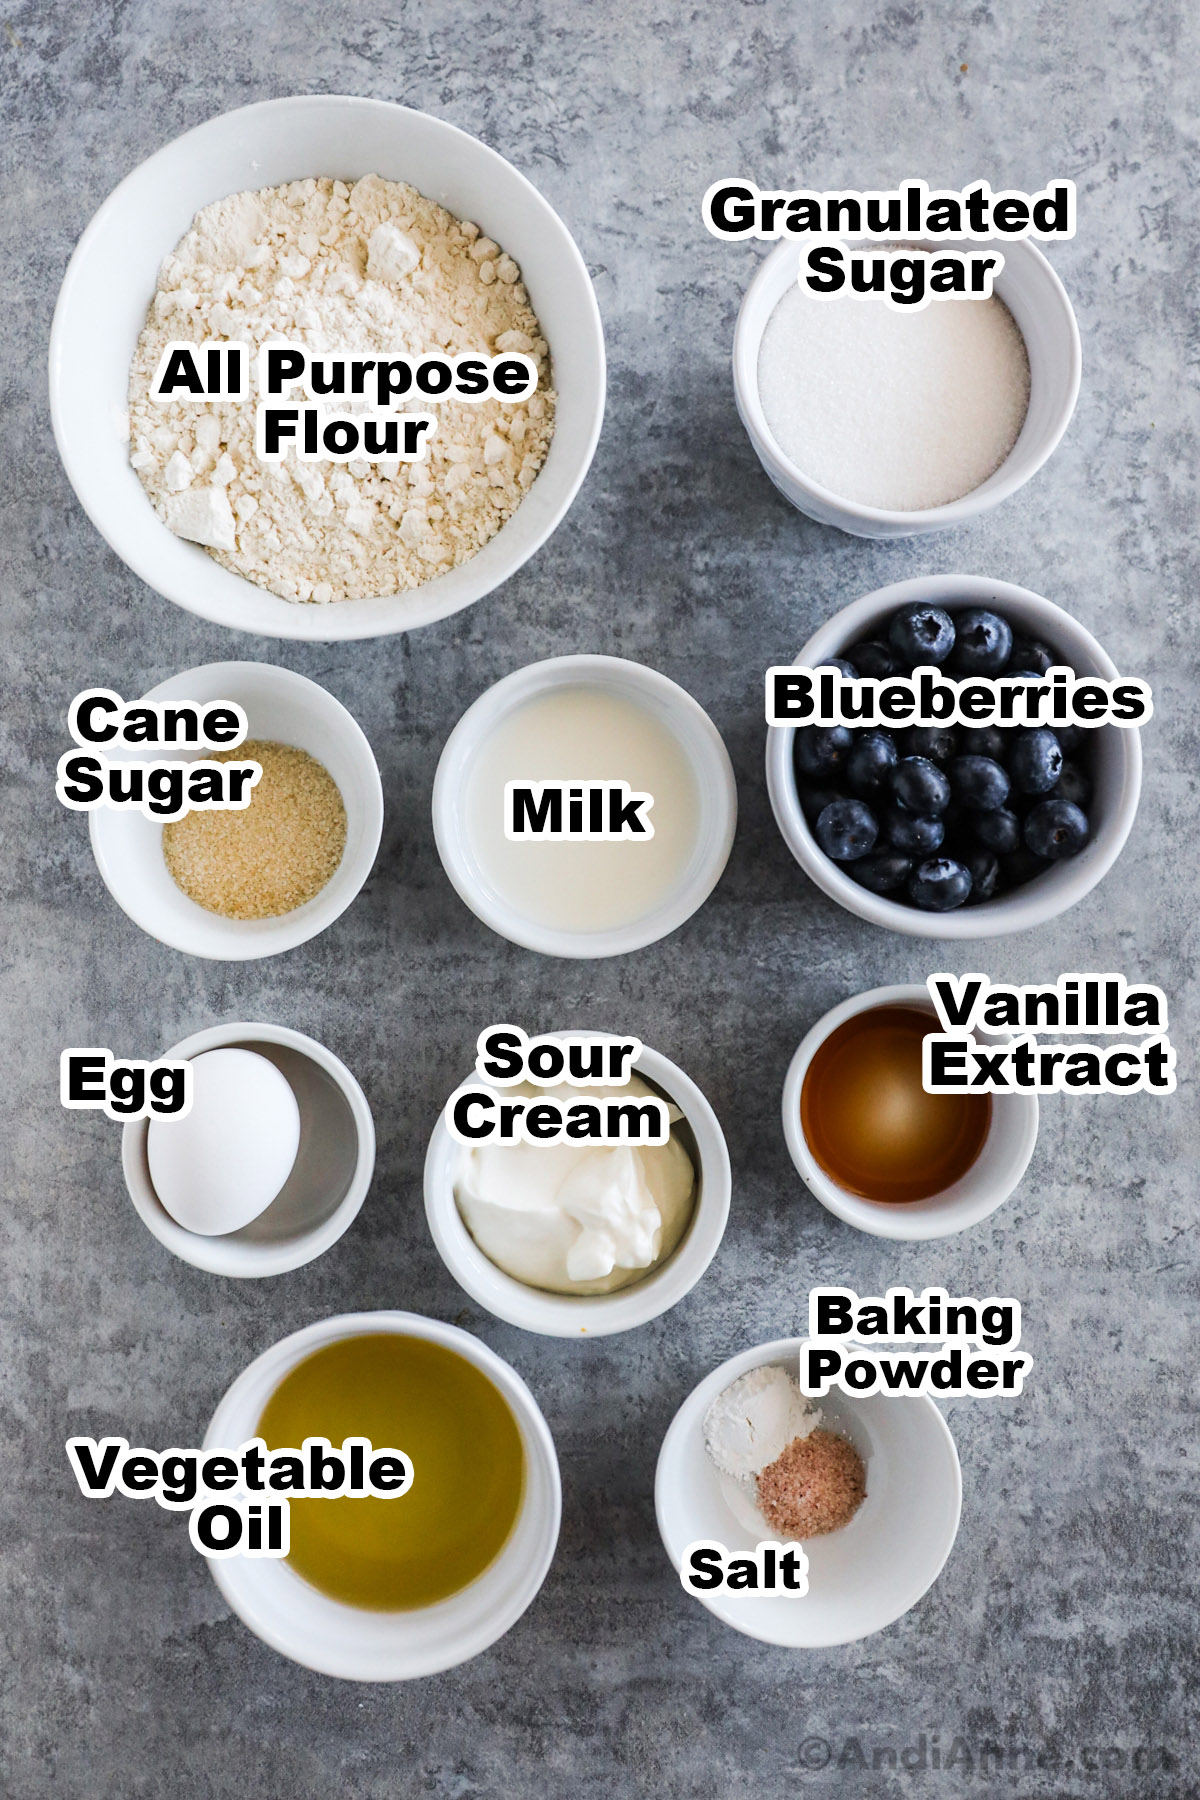 Recipe ingredients in bowls including flour, sugar, milk, blueberries, egg, sour cream, vanilla extract, oil, and baking powder.